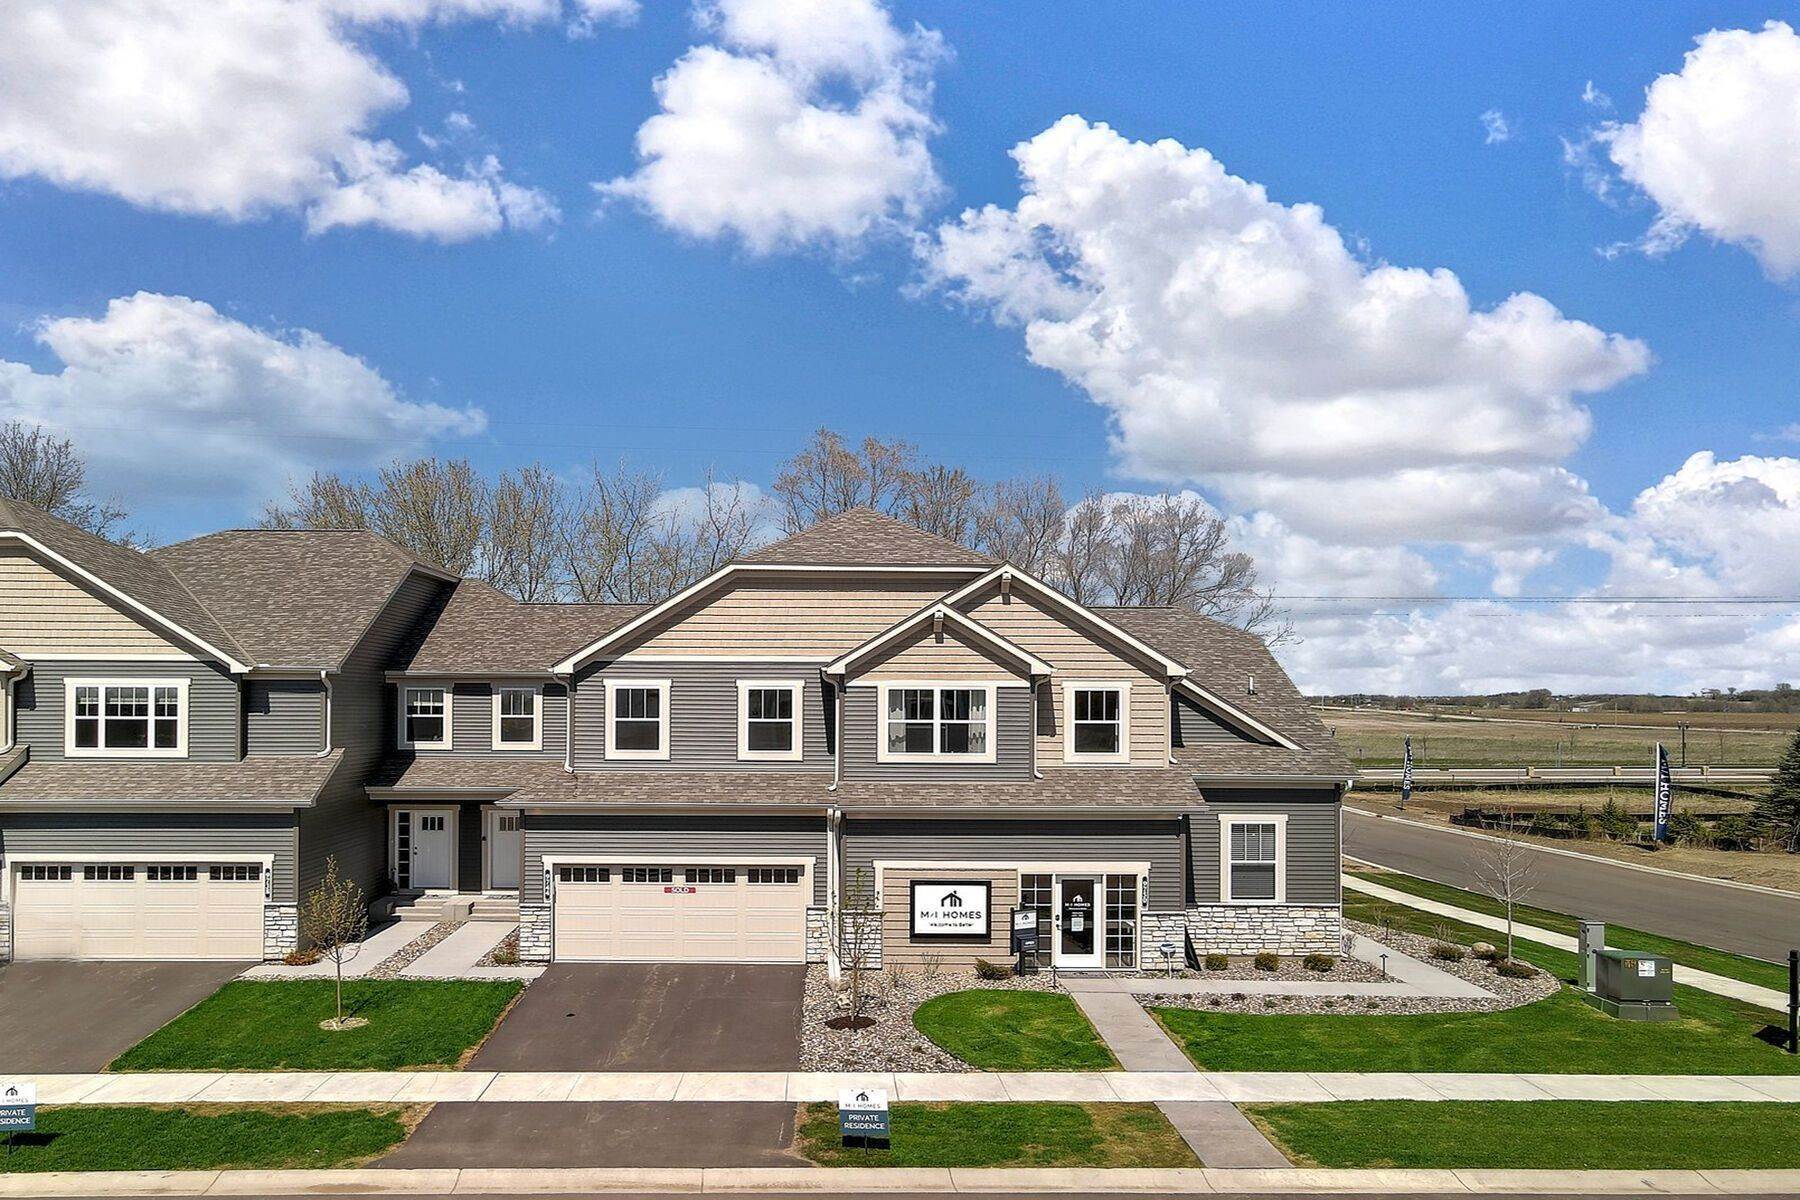 19. Woodward Ponds byggnad vid 9750 65th Street South, Cottage Grove, MN 55016